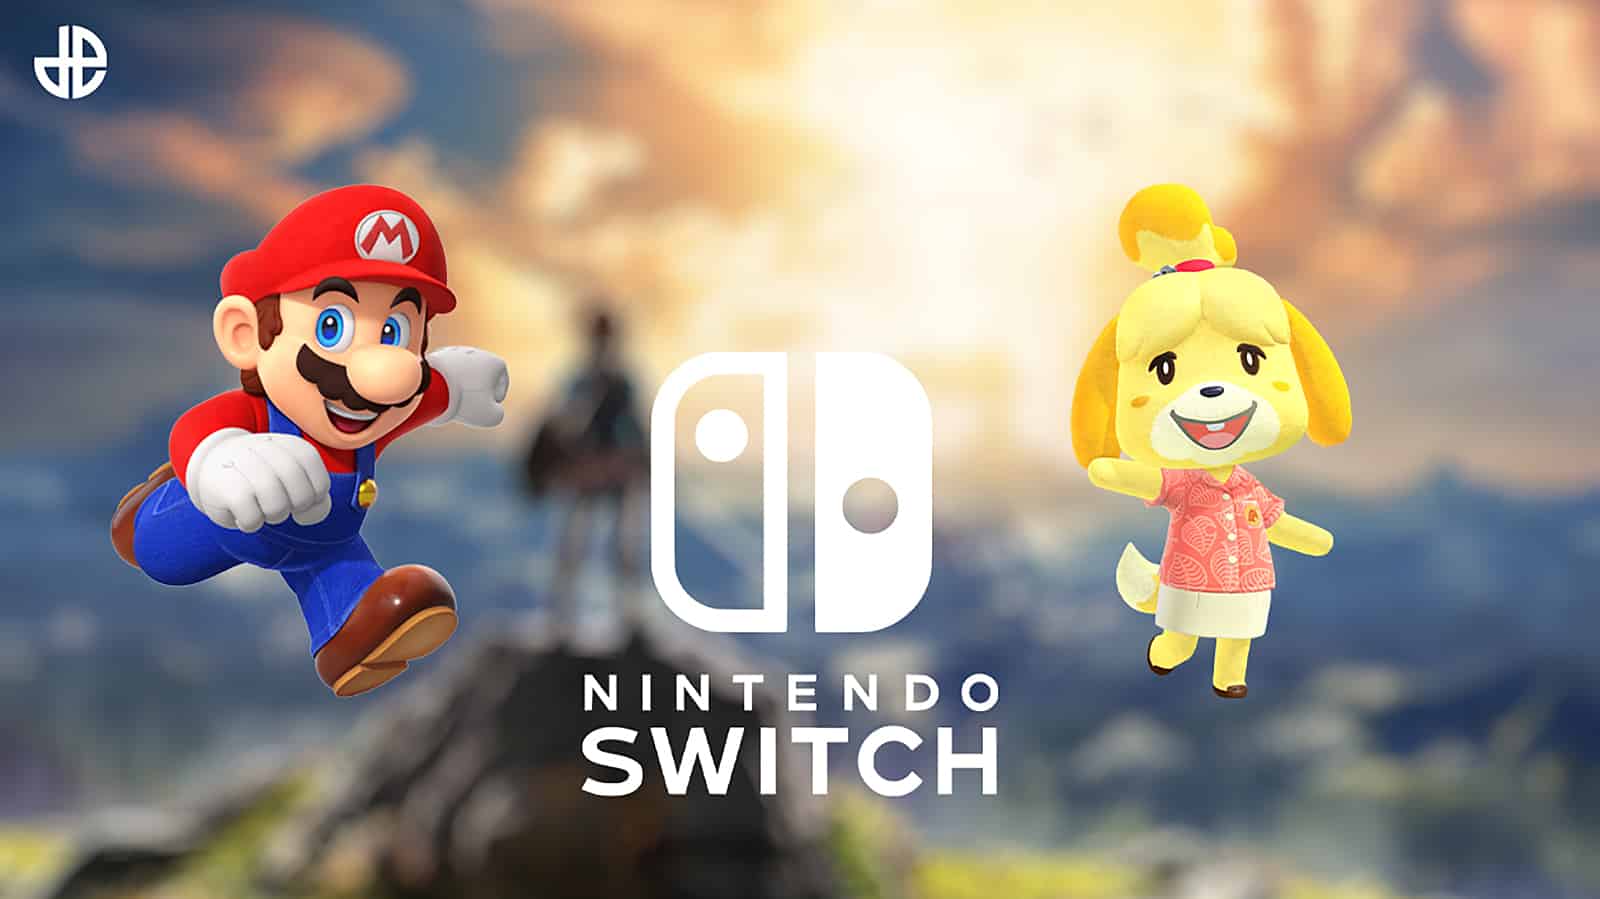 An image of the Nintendo Switch logo with a blurred background of link and other Nintendo game characters